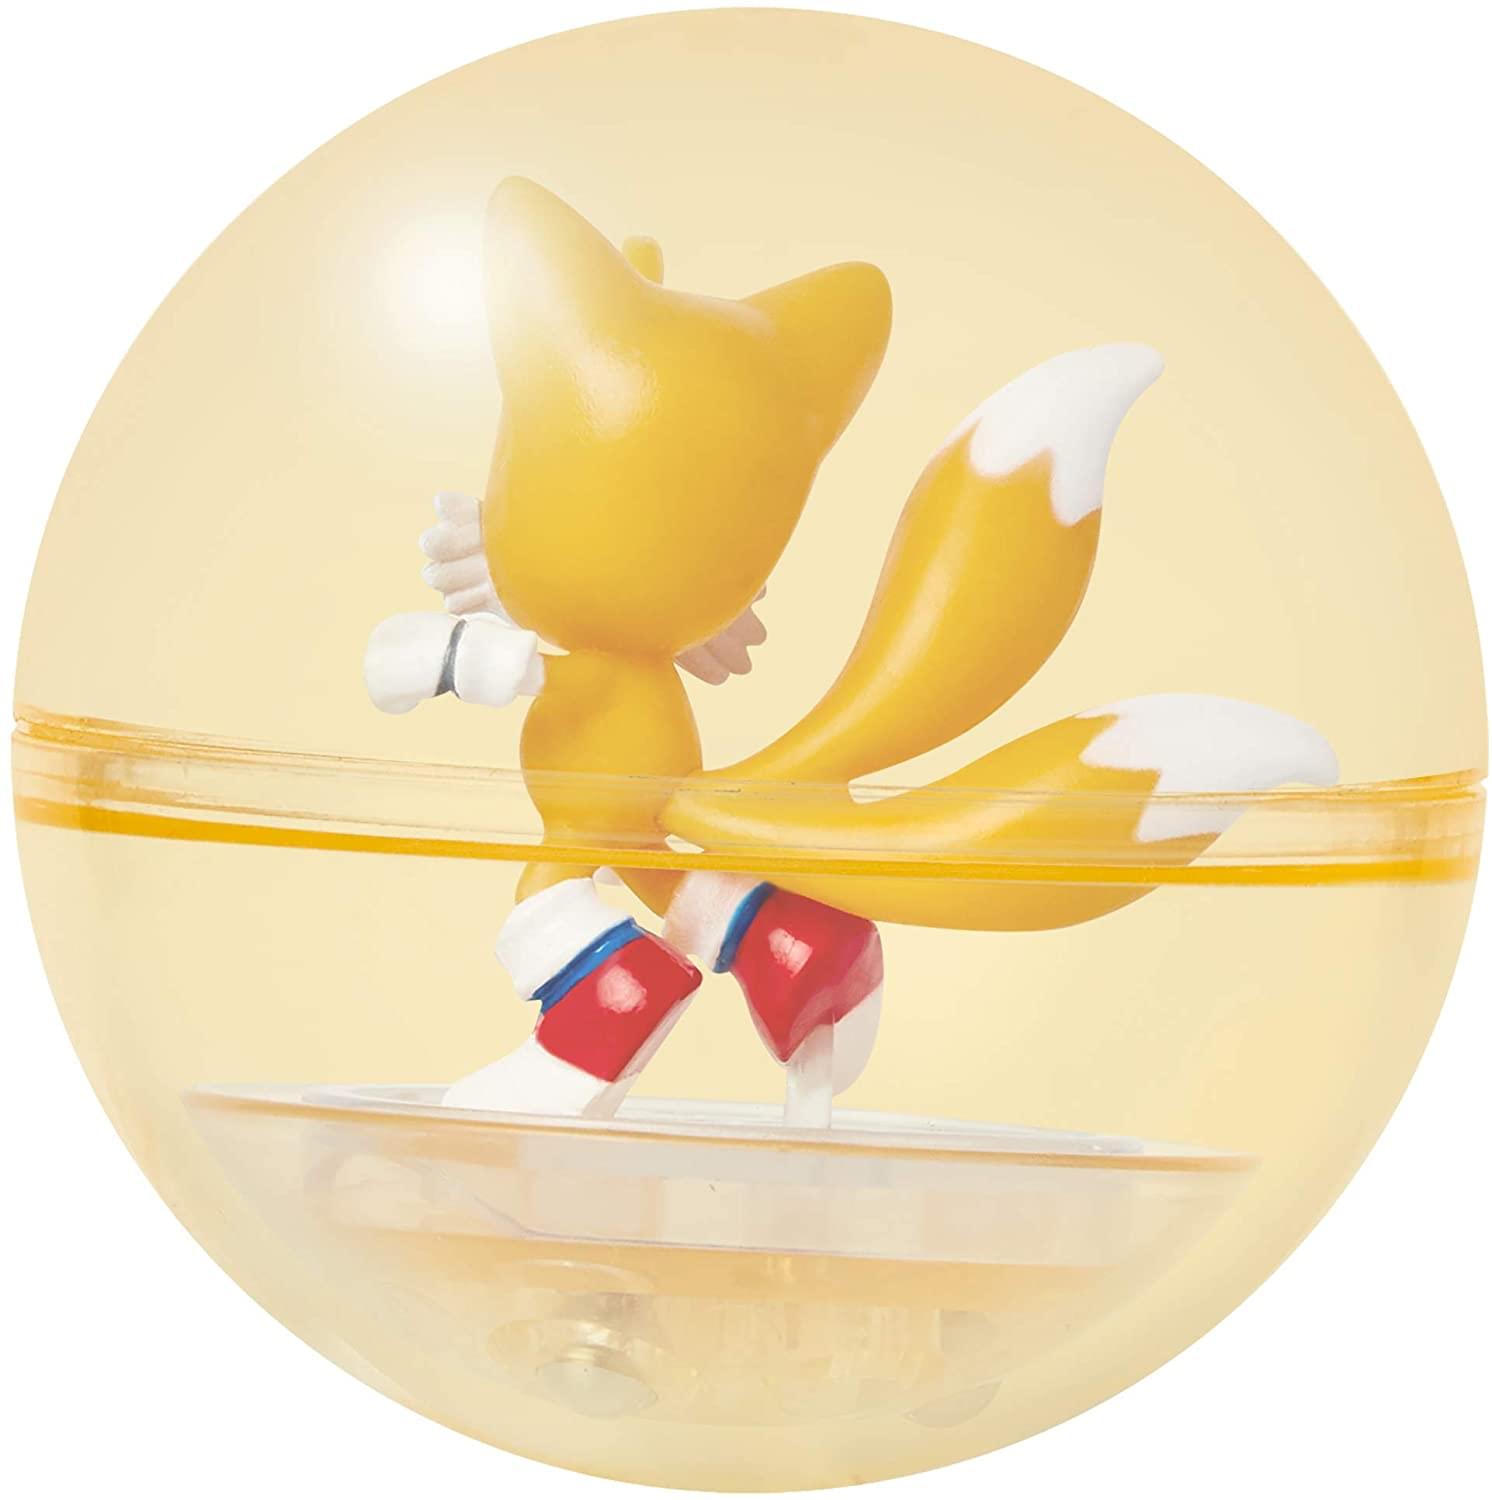 Sonic The Hedgehog 2 Inch Booster Sphere Figure